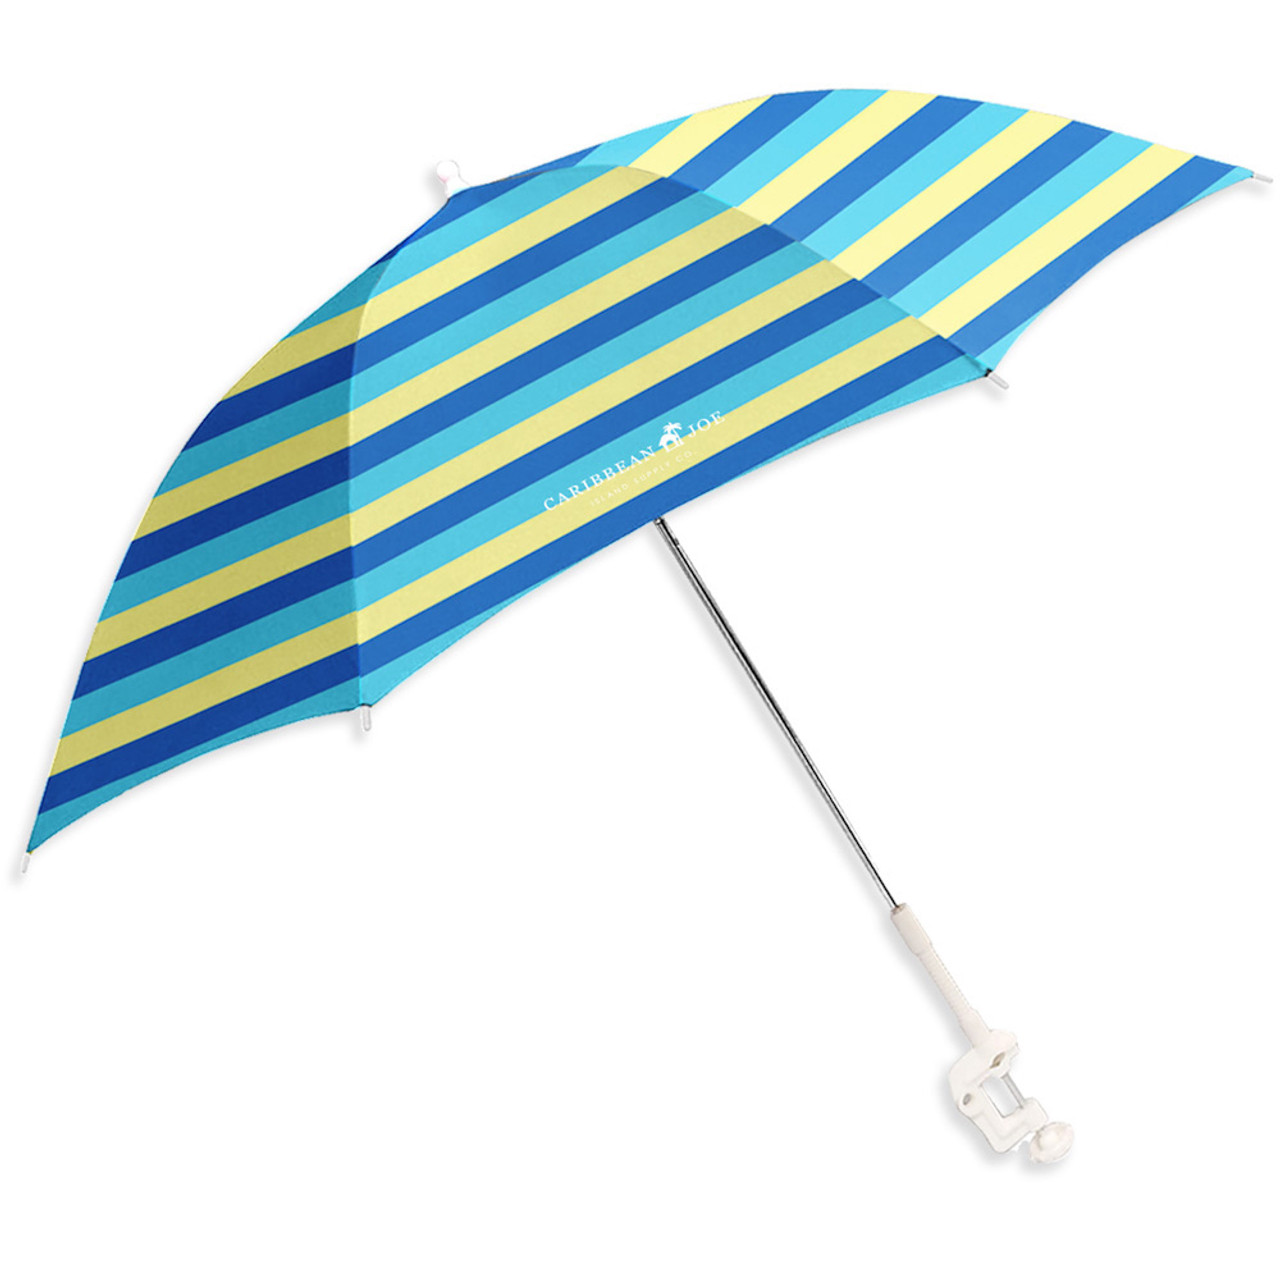 A large striped beach umbrella with blue, yellow, and green stripes.